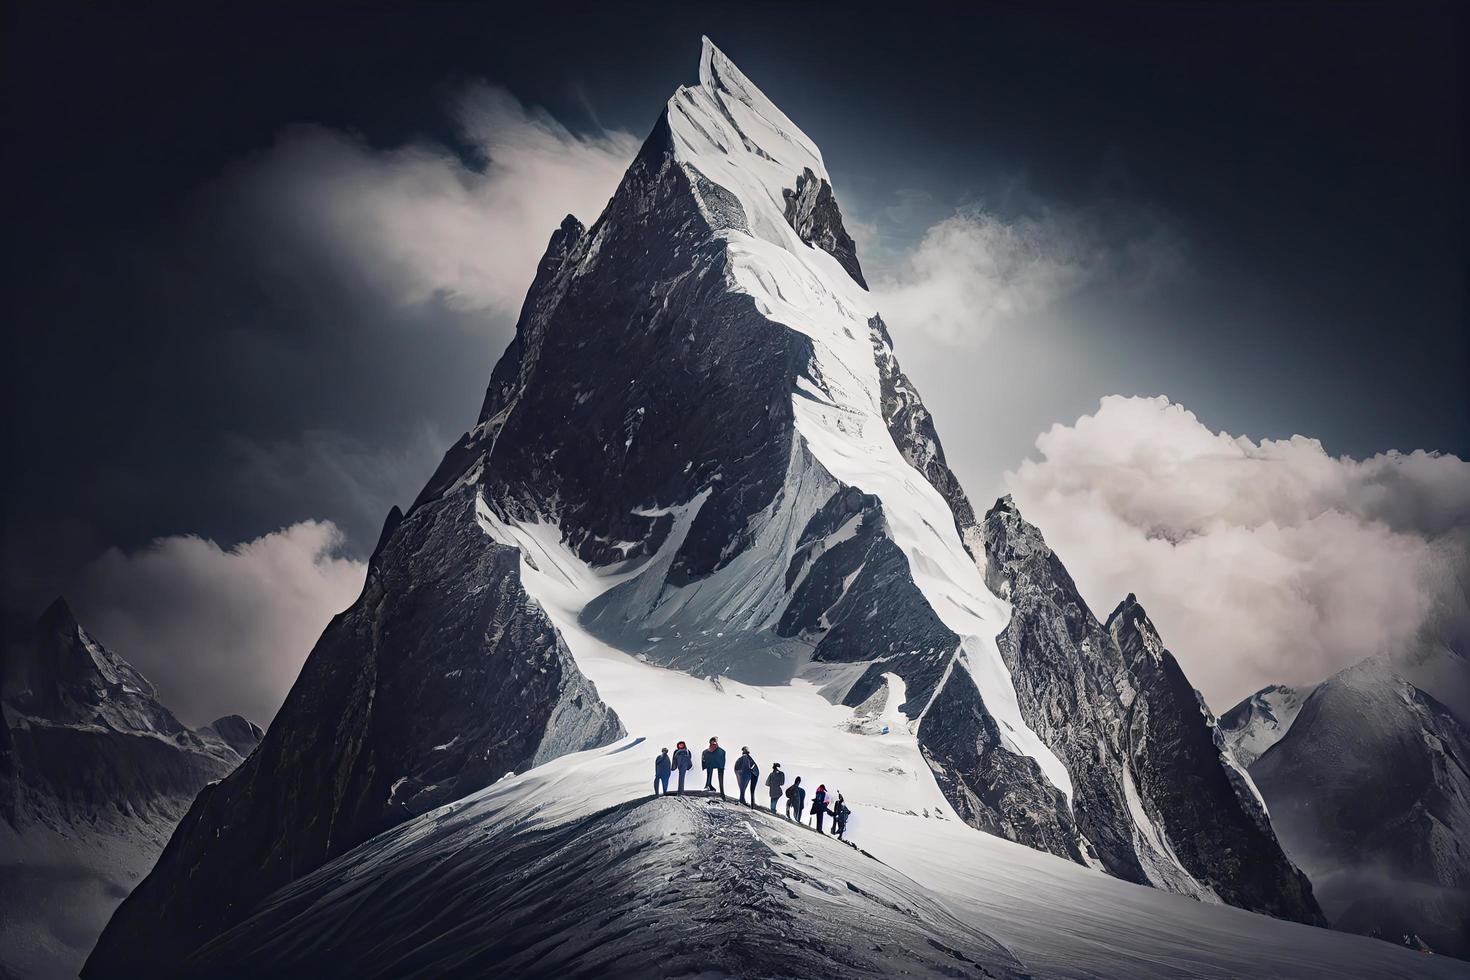 Group of mountaineers. Multiple high alpine climbers in front of a gigantic mountain photo